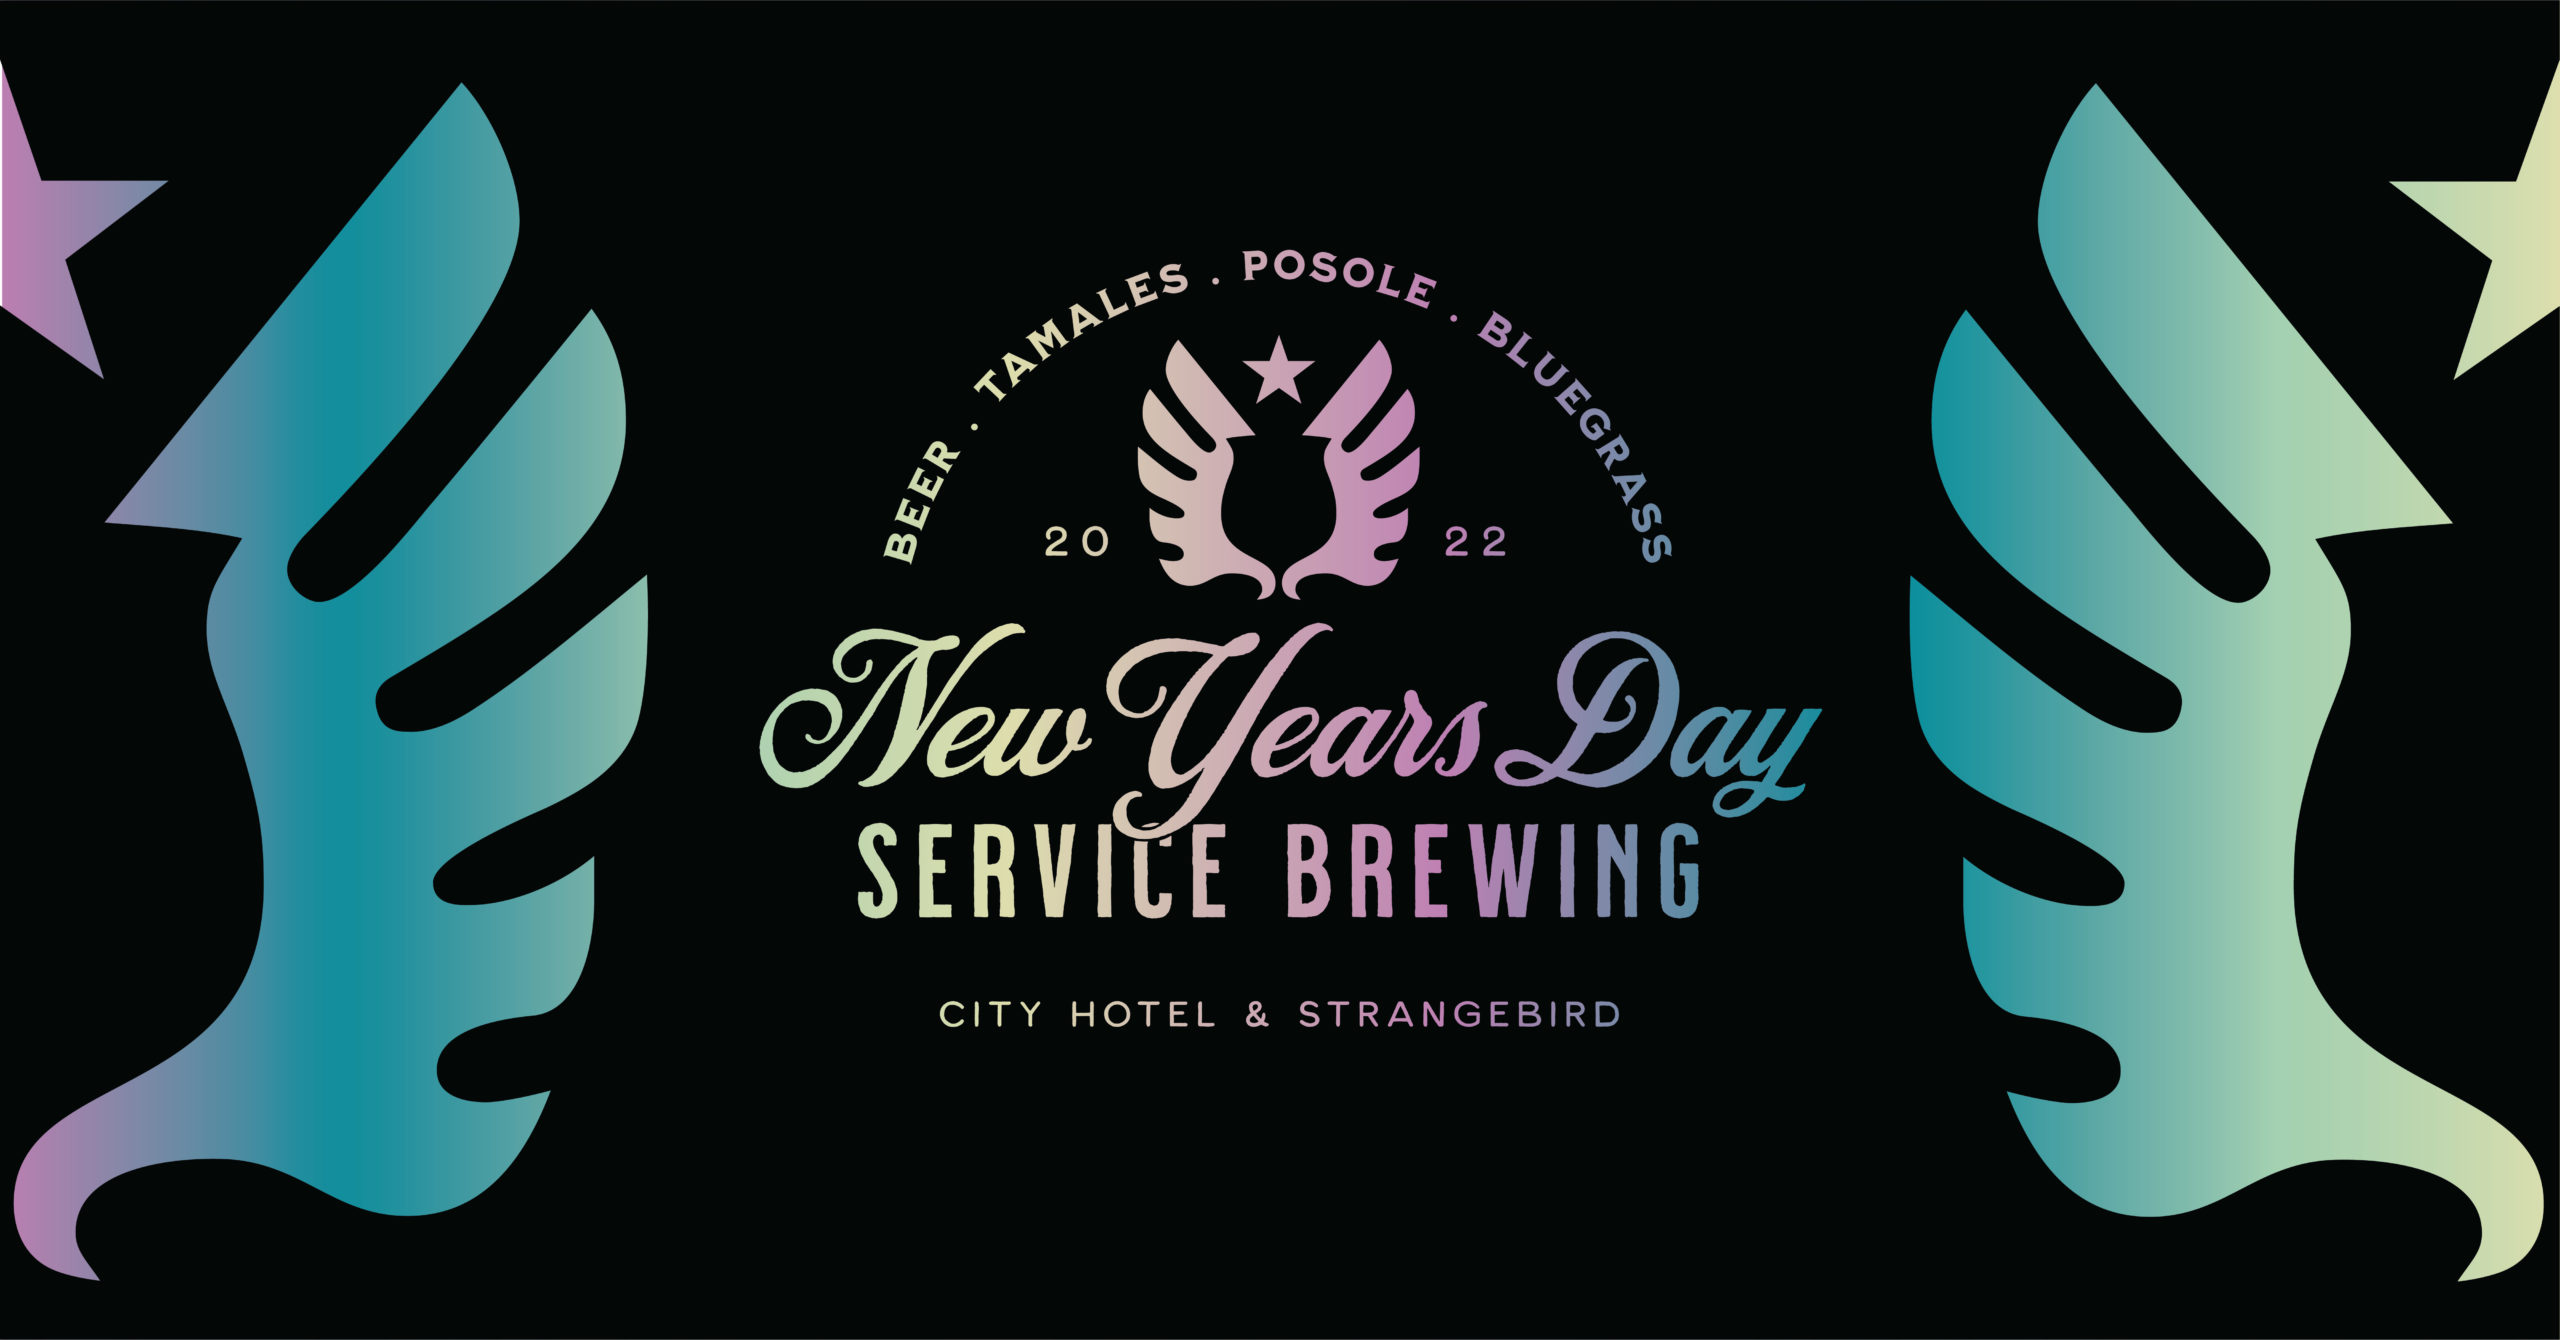 Celebrate New Year’s Day With Cold Beer, Great Food, and Live Music!